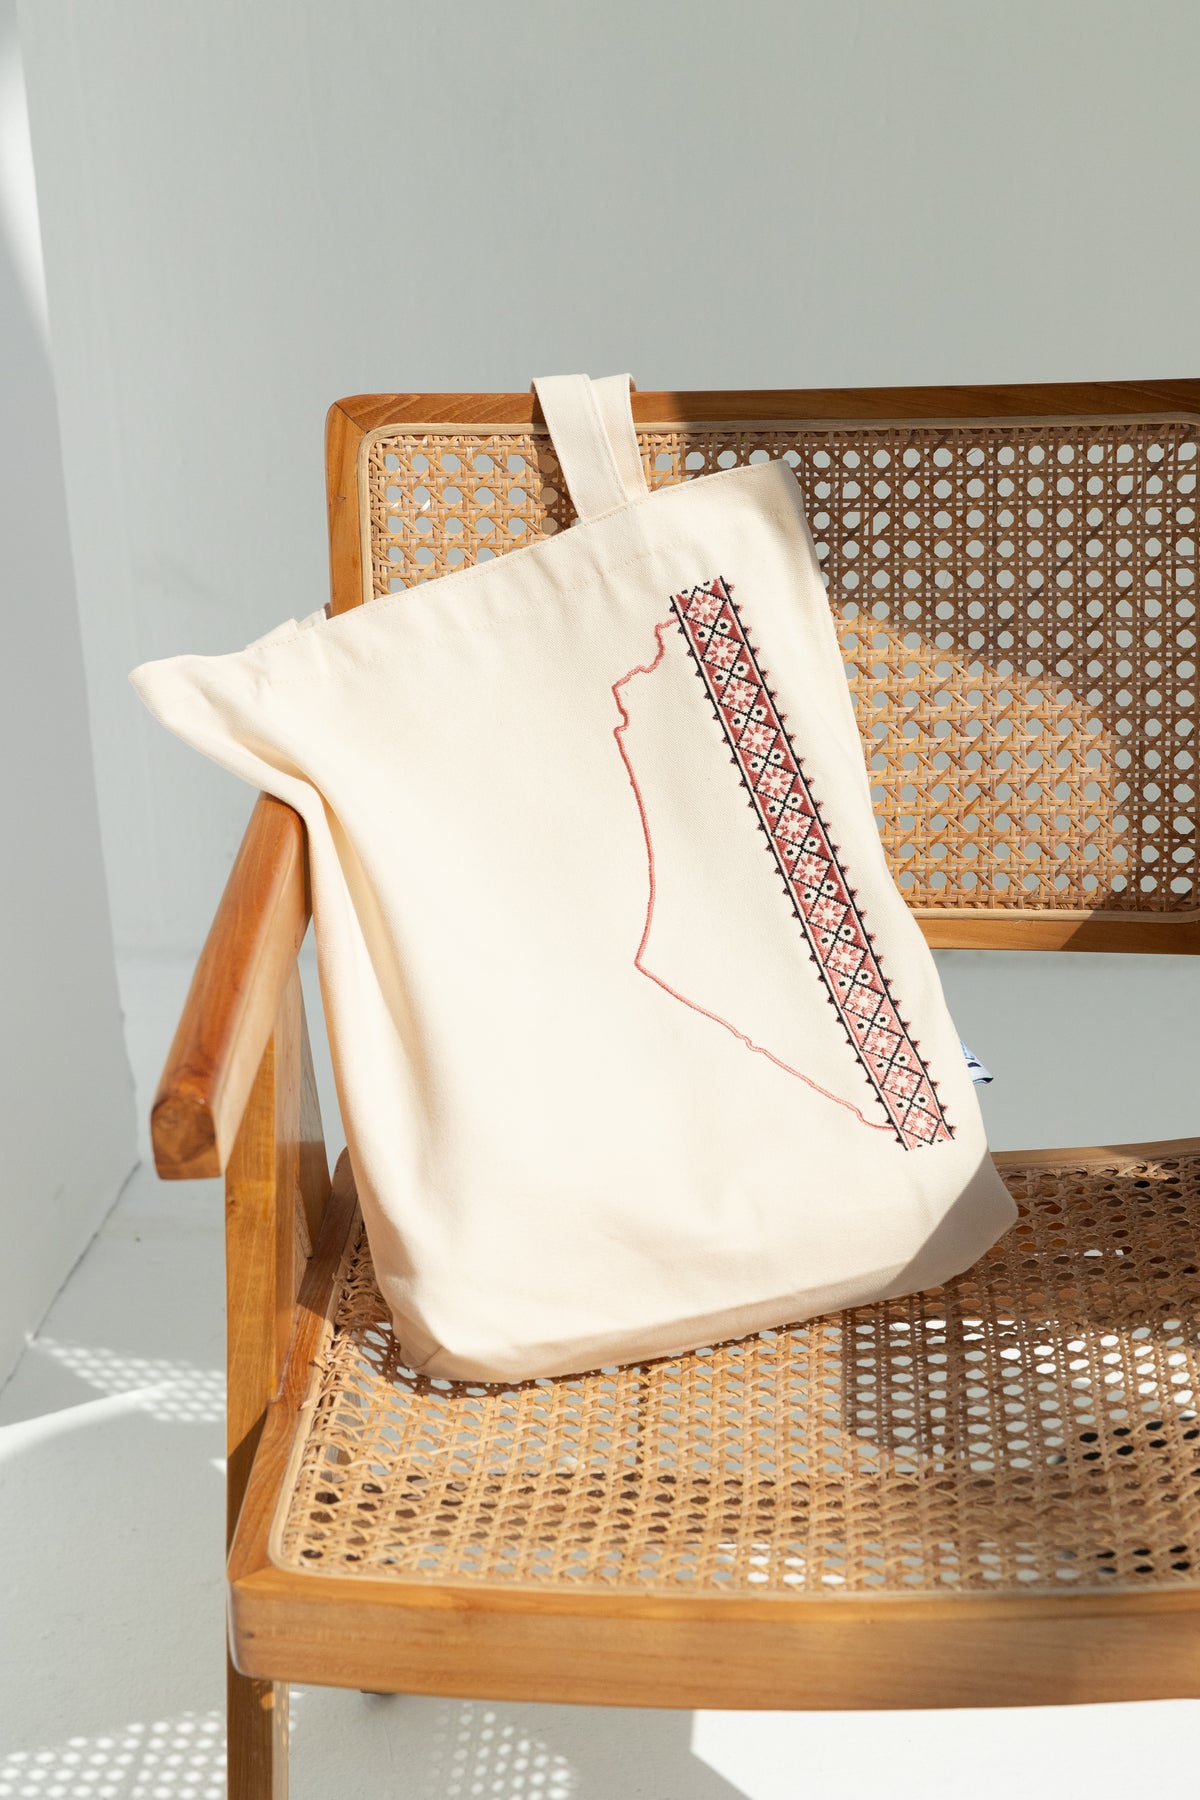 My borders are Palestinian Tote bag